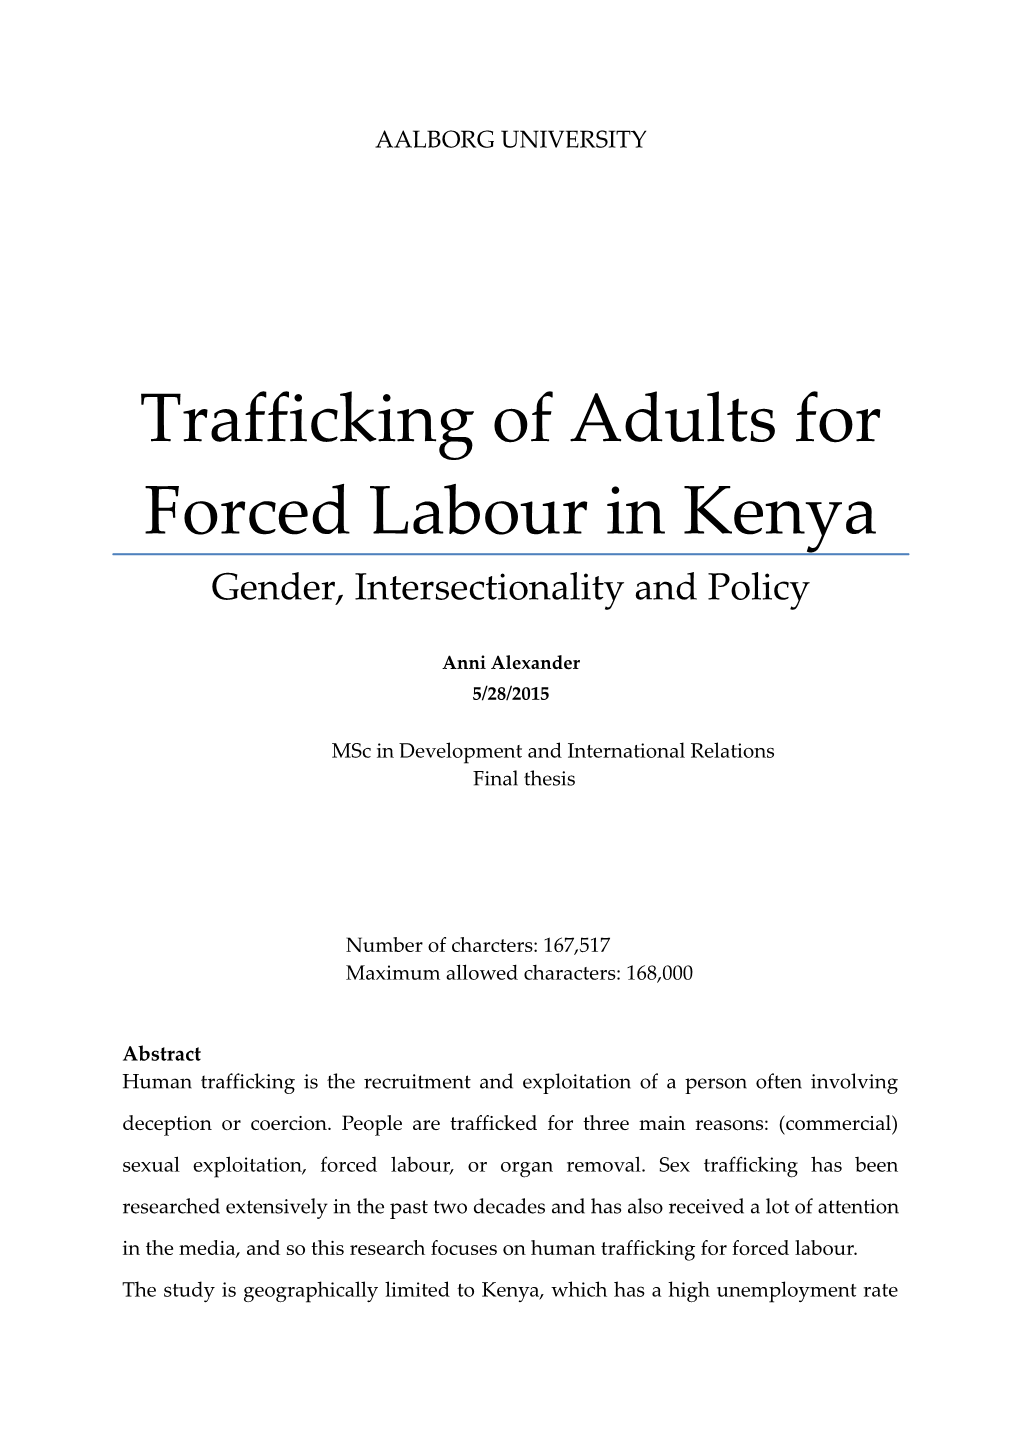 Trafficking of Adults for Forced Labour in Kenya